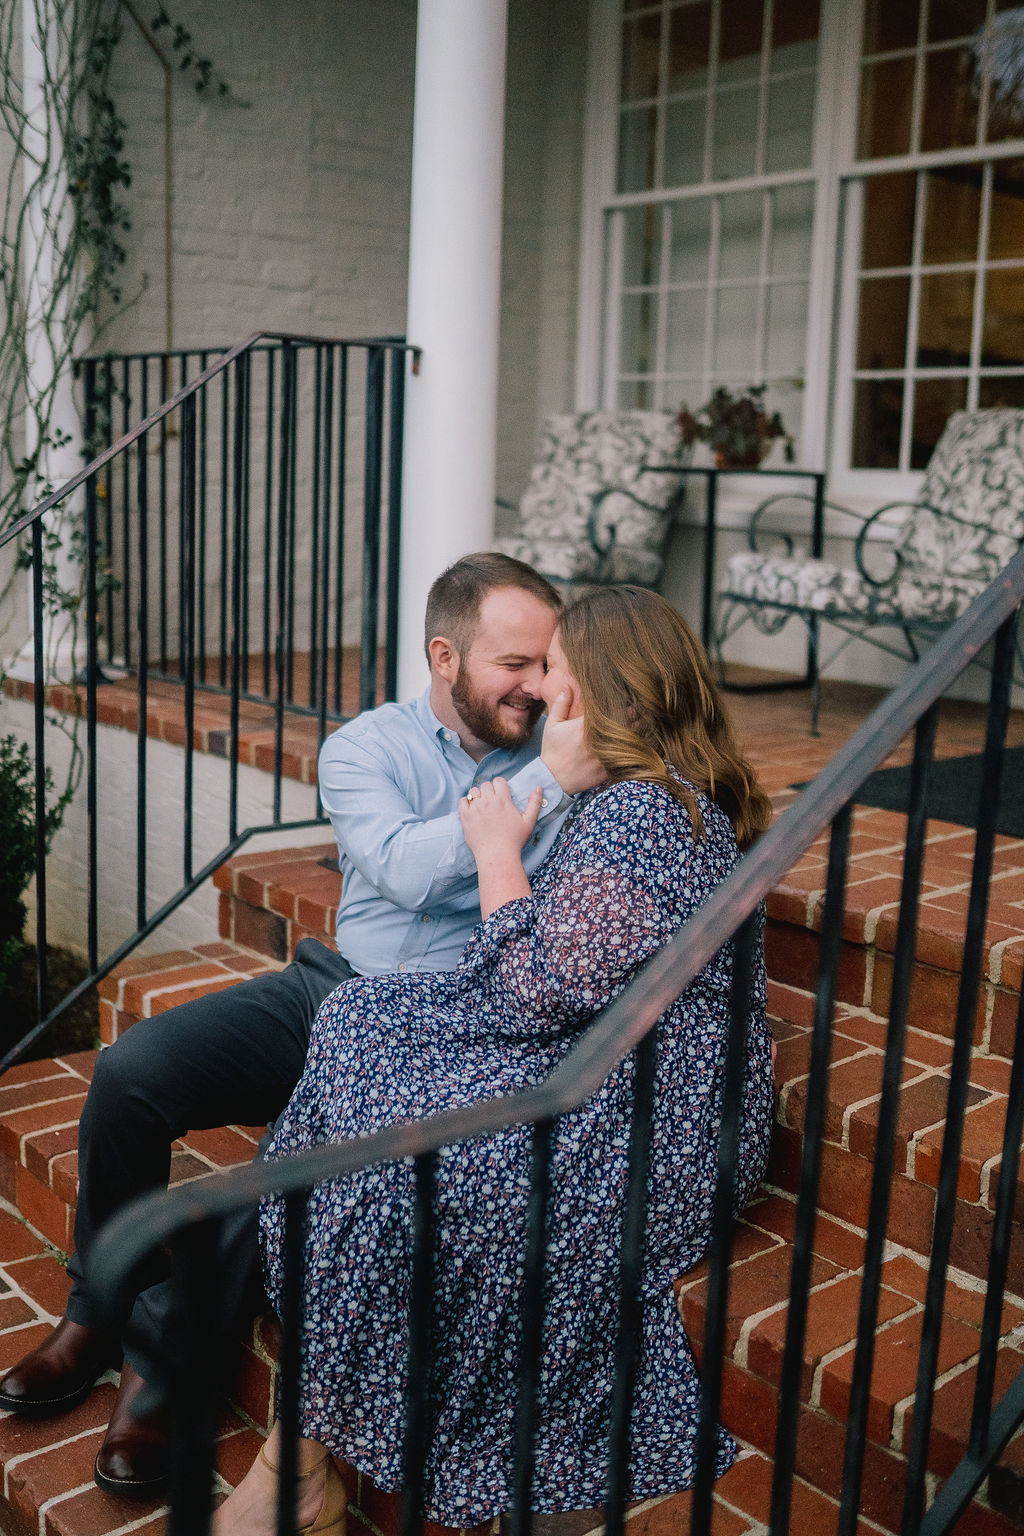 engagement session on a front porch in Knoxville Tennessee. Man holding woman's face. woman wearing navy blue summer dress for her engagement session